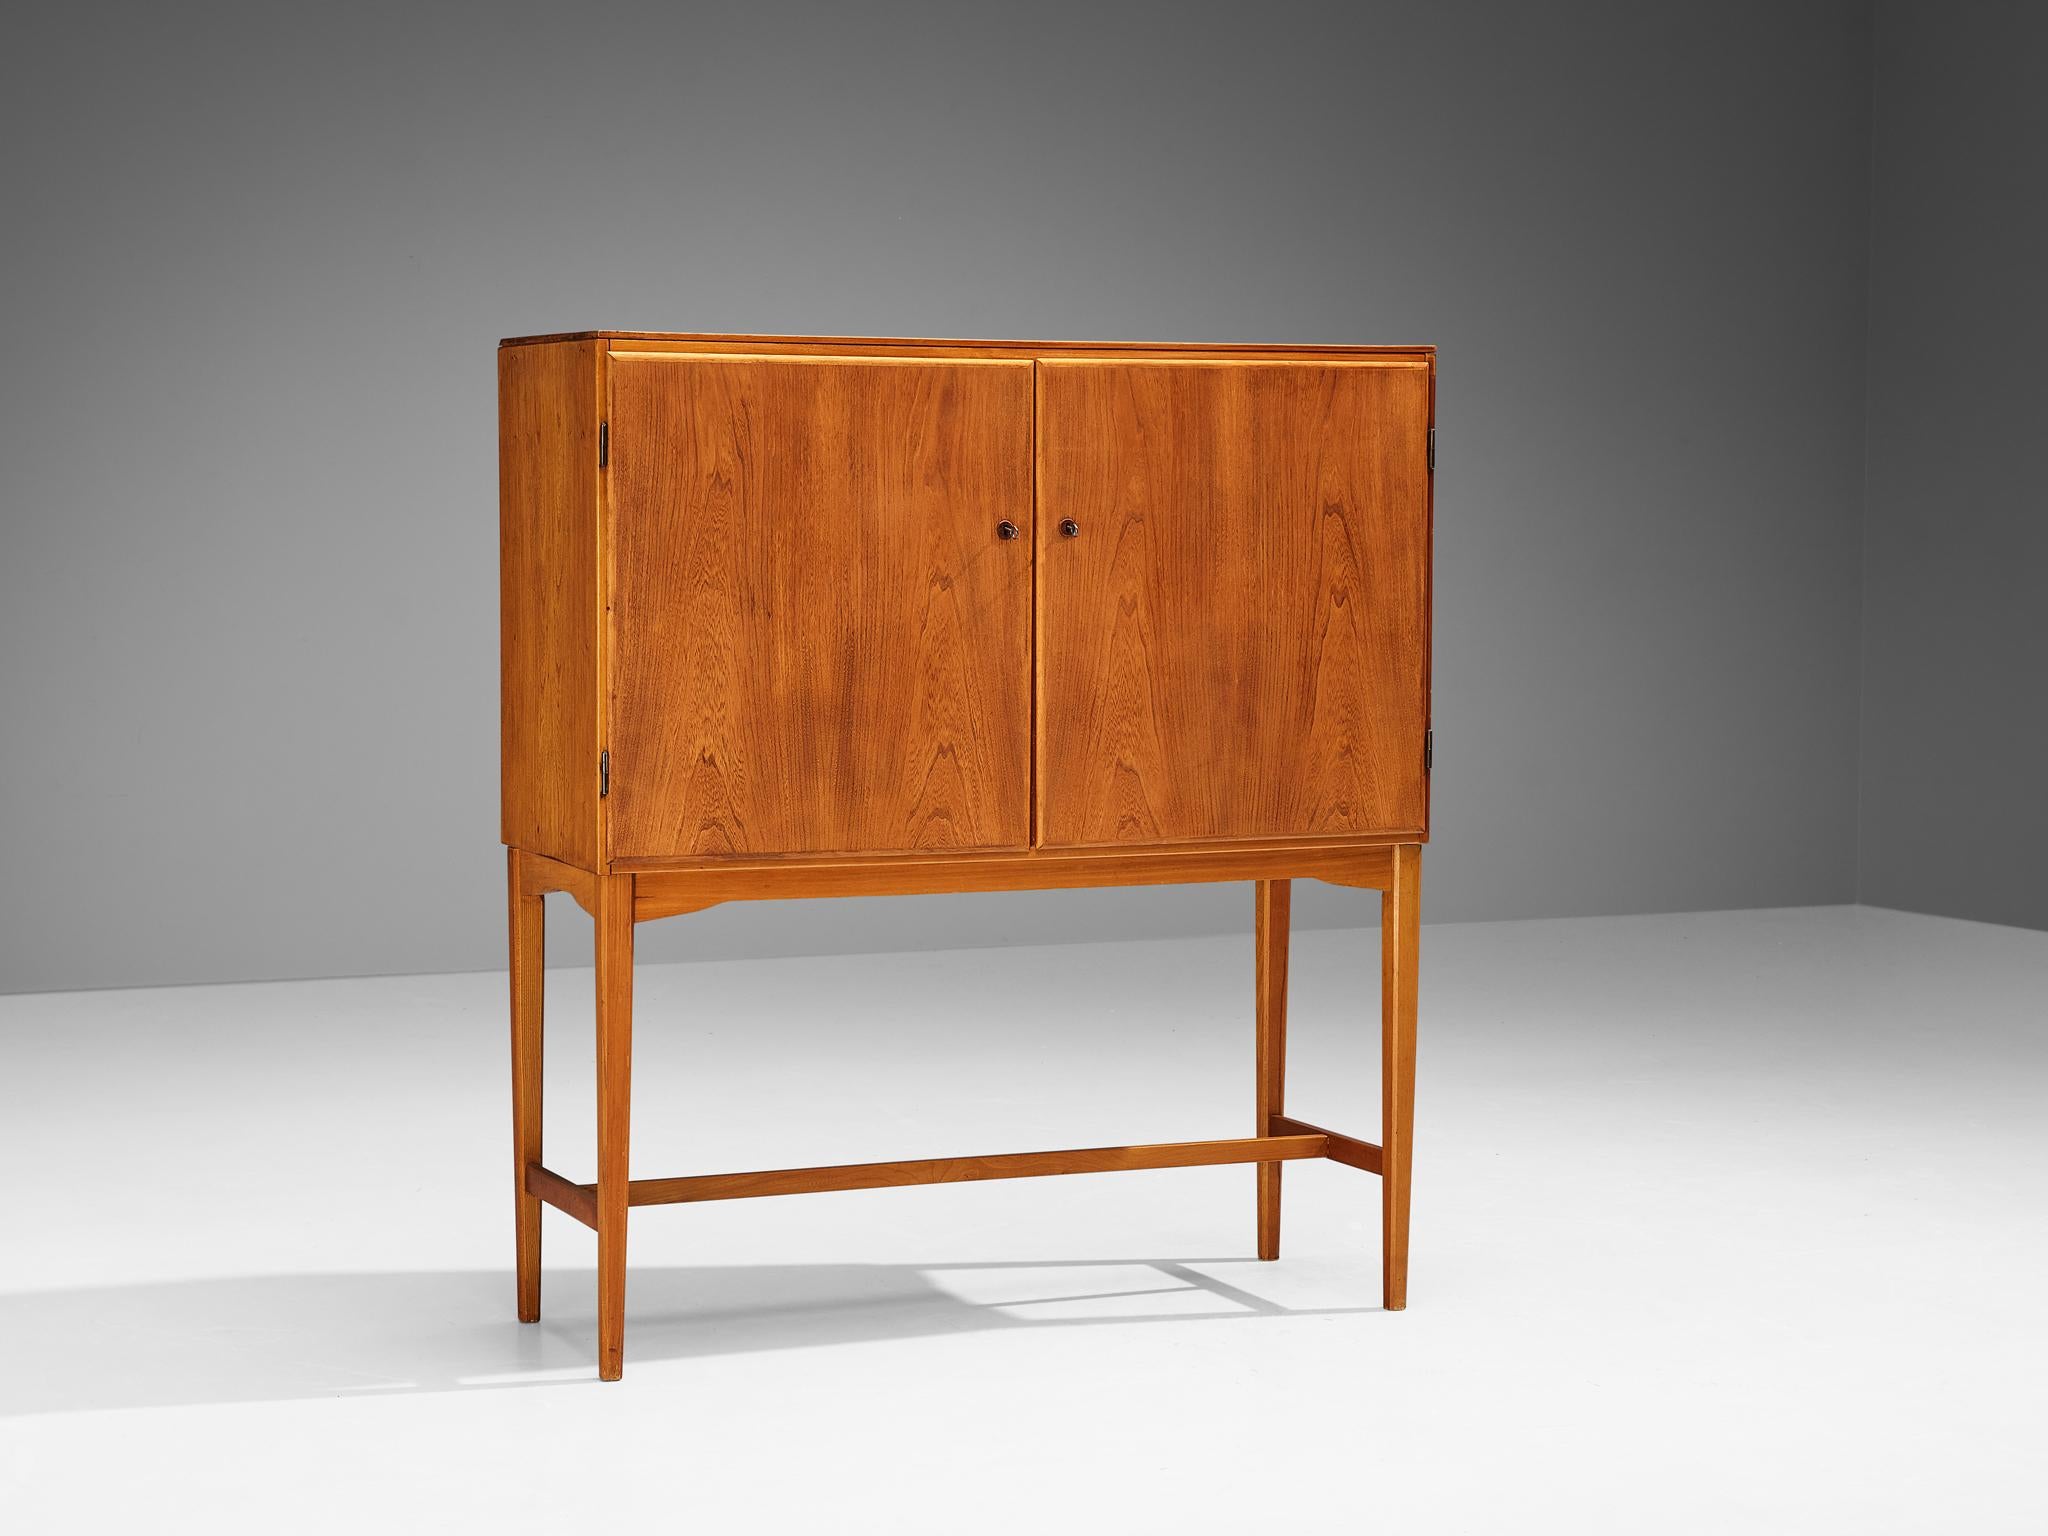 Cabinet, teak, beech, Denmark, late 1940s. 

Excellent Danish cabinet executed in beautiful teak that shows a dynamic grain pattern. An open exterior is realised with the ‘cabinet-on-stand’ feature that is based on English and Asian cabinets